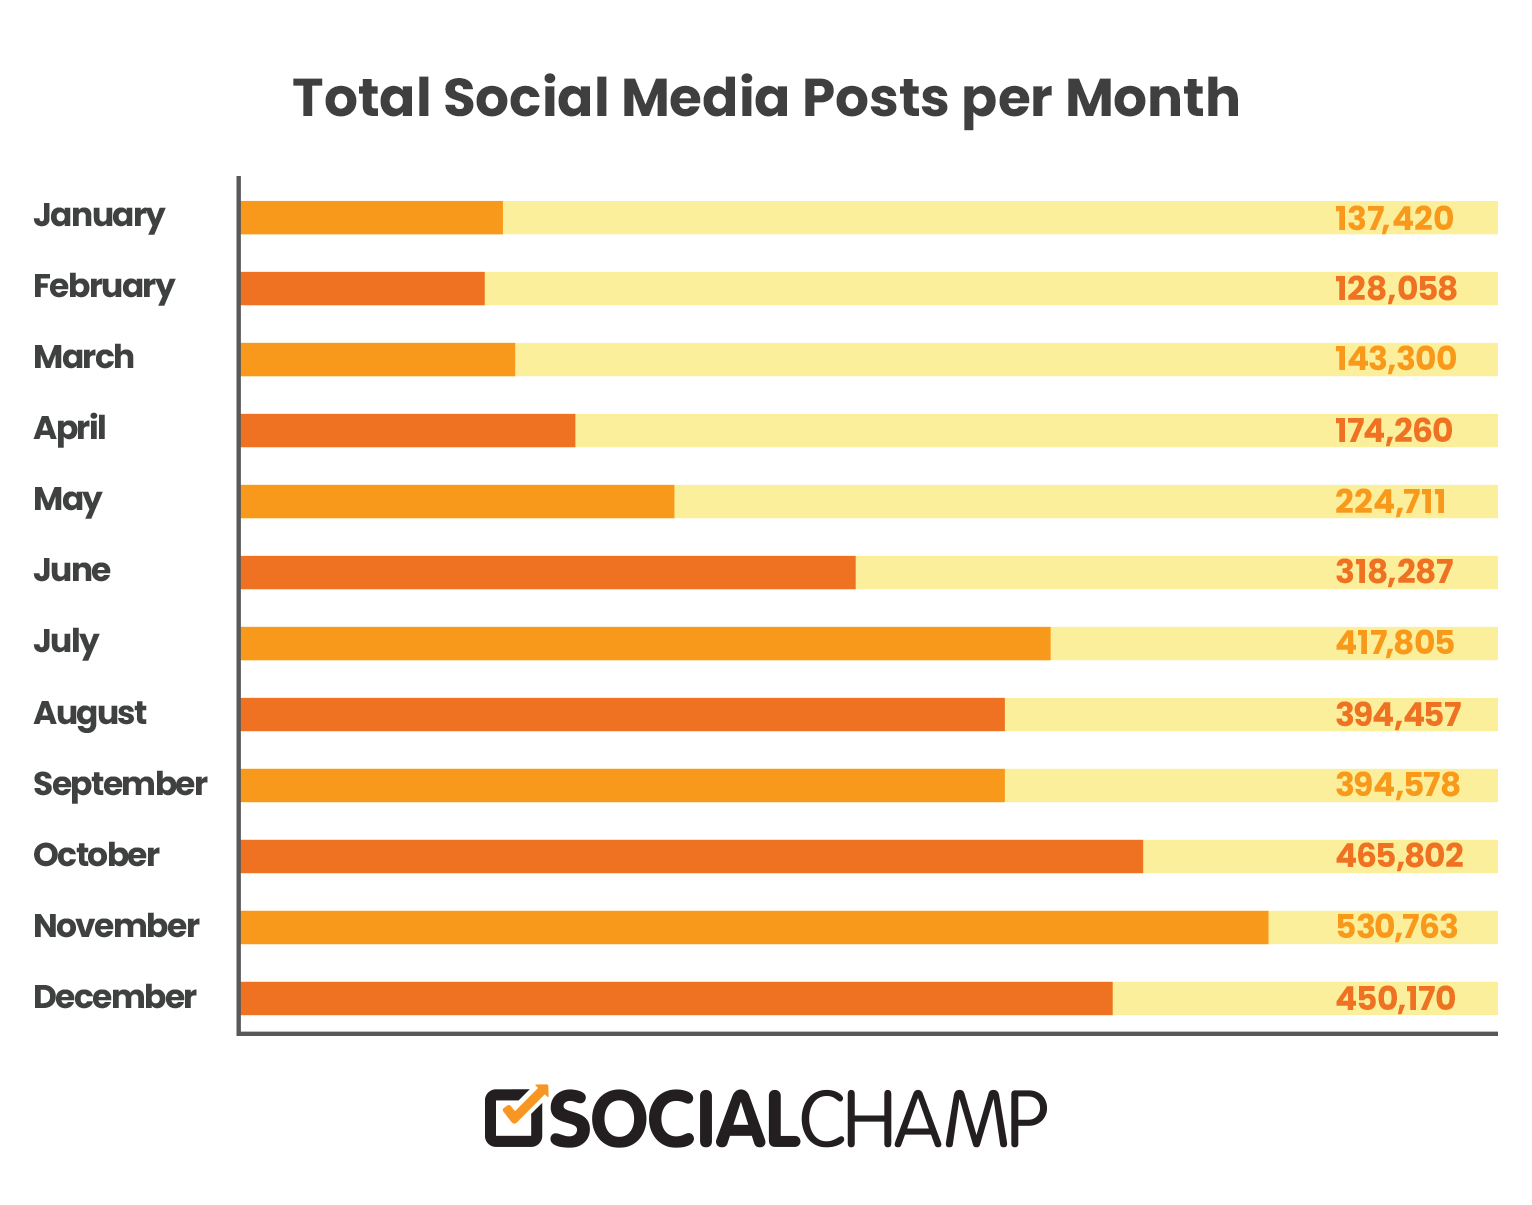 Total posts on social media by Social Champ per month